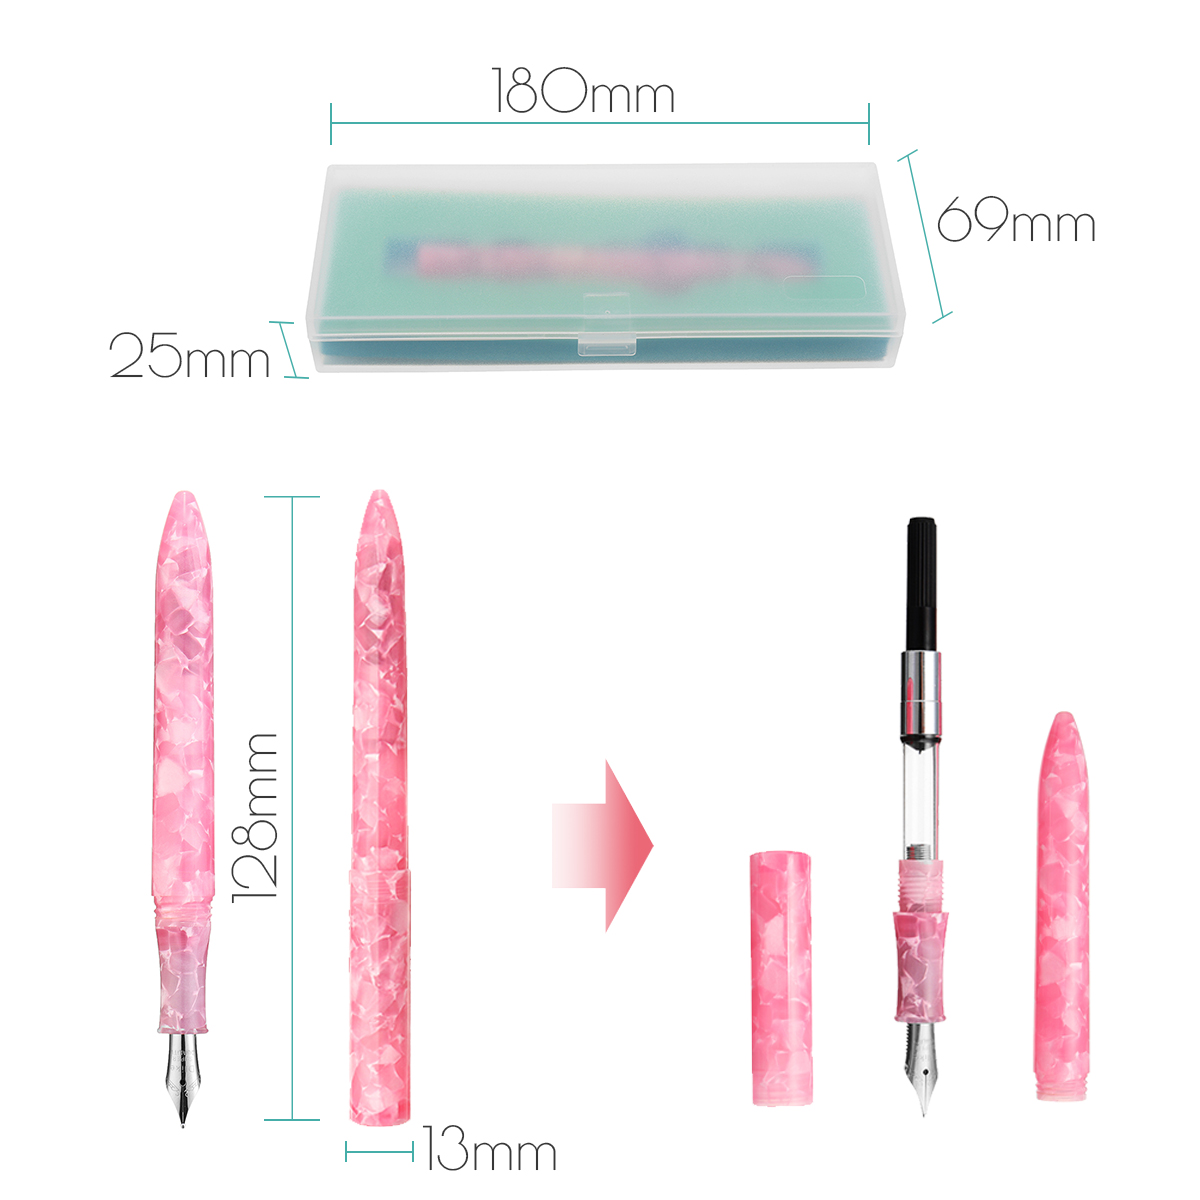 Delike-06mm-Nib-Resin-Fountain-Pen-Rotating-Ink-Calligraphy-Writing-With-Box-For-Office-School-1303281-8